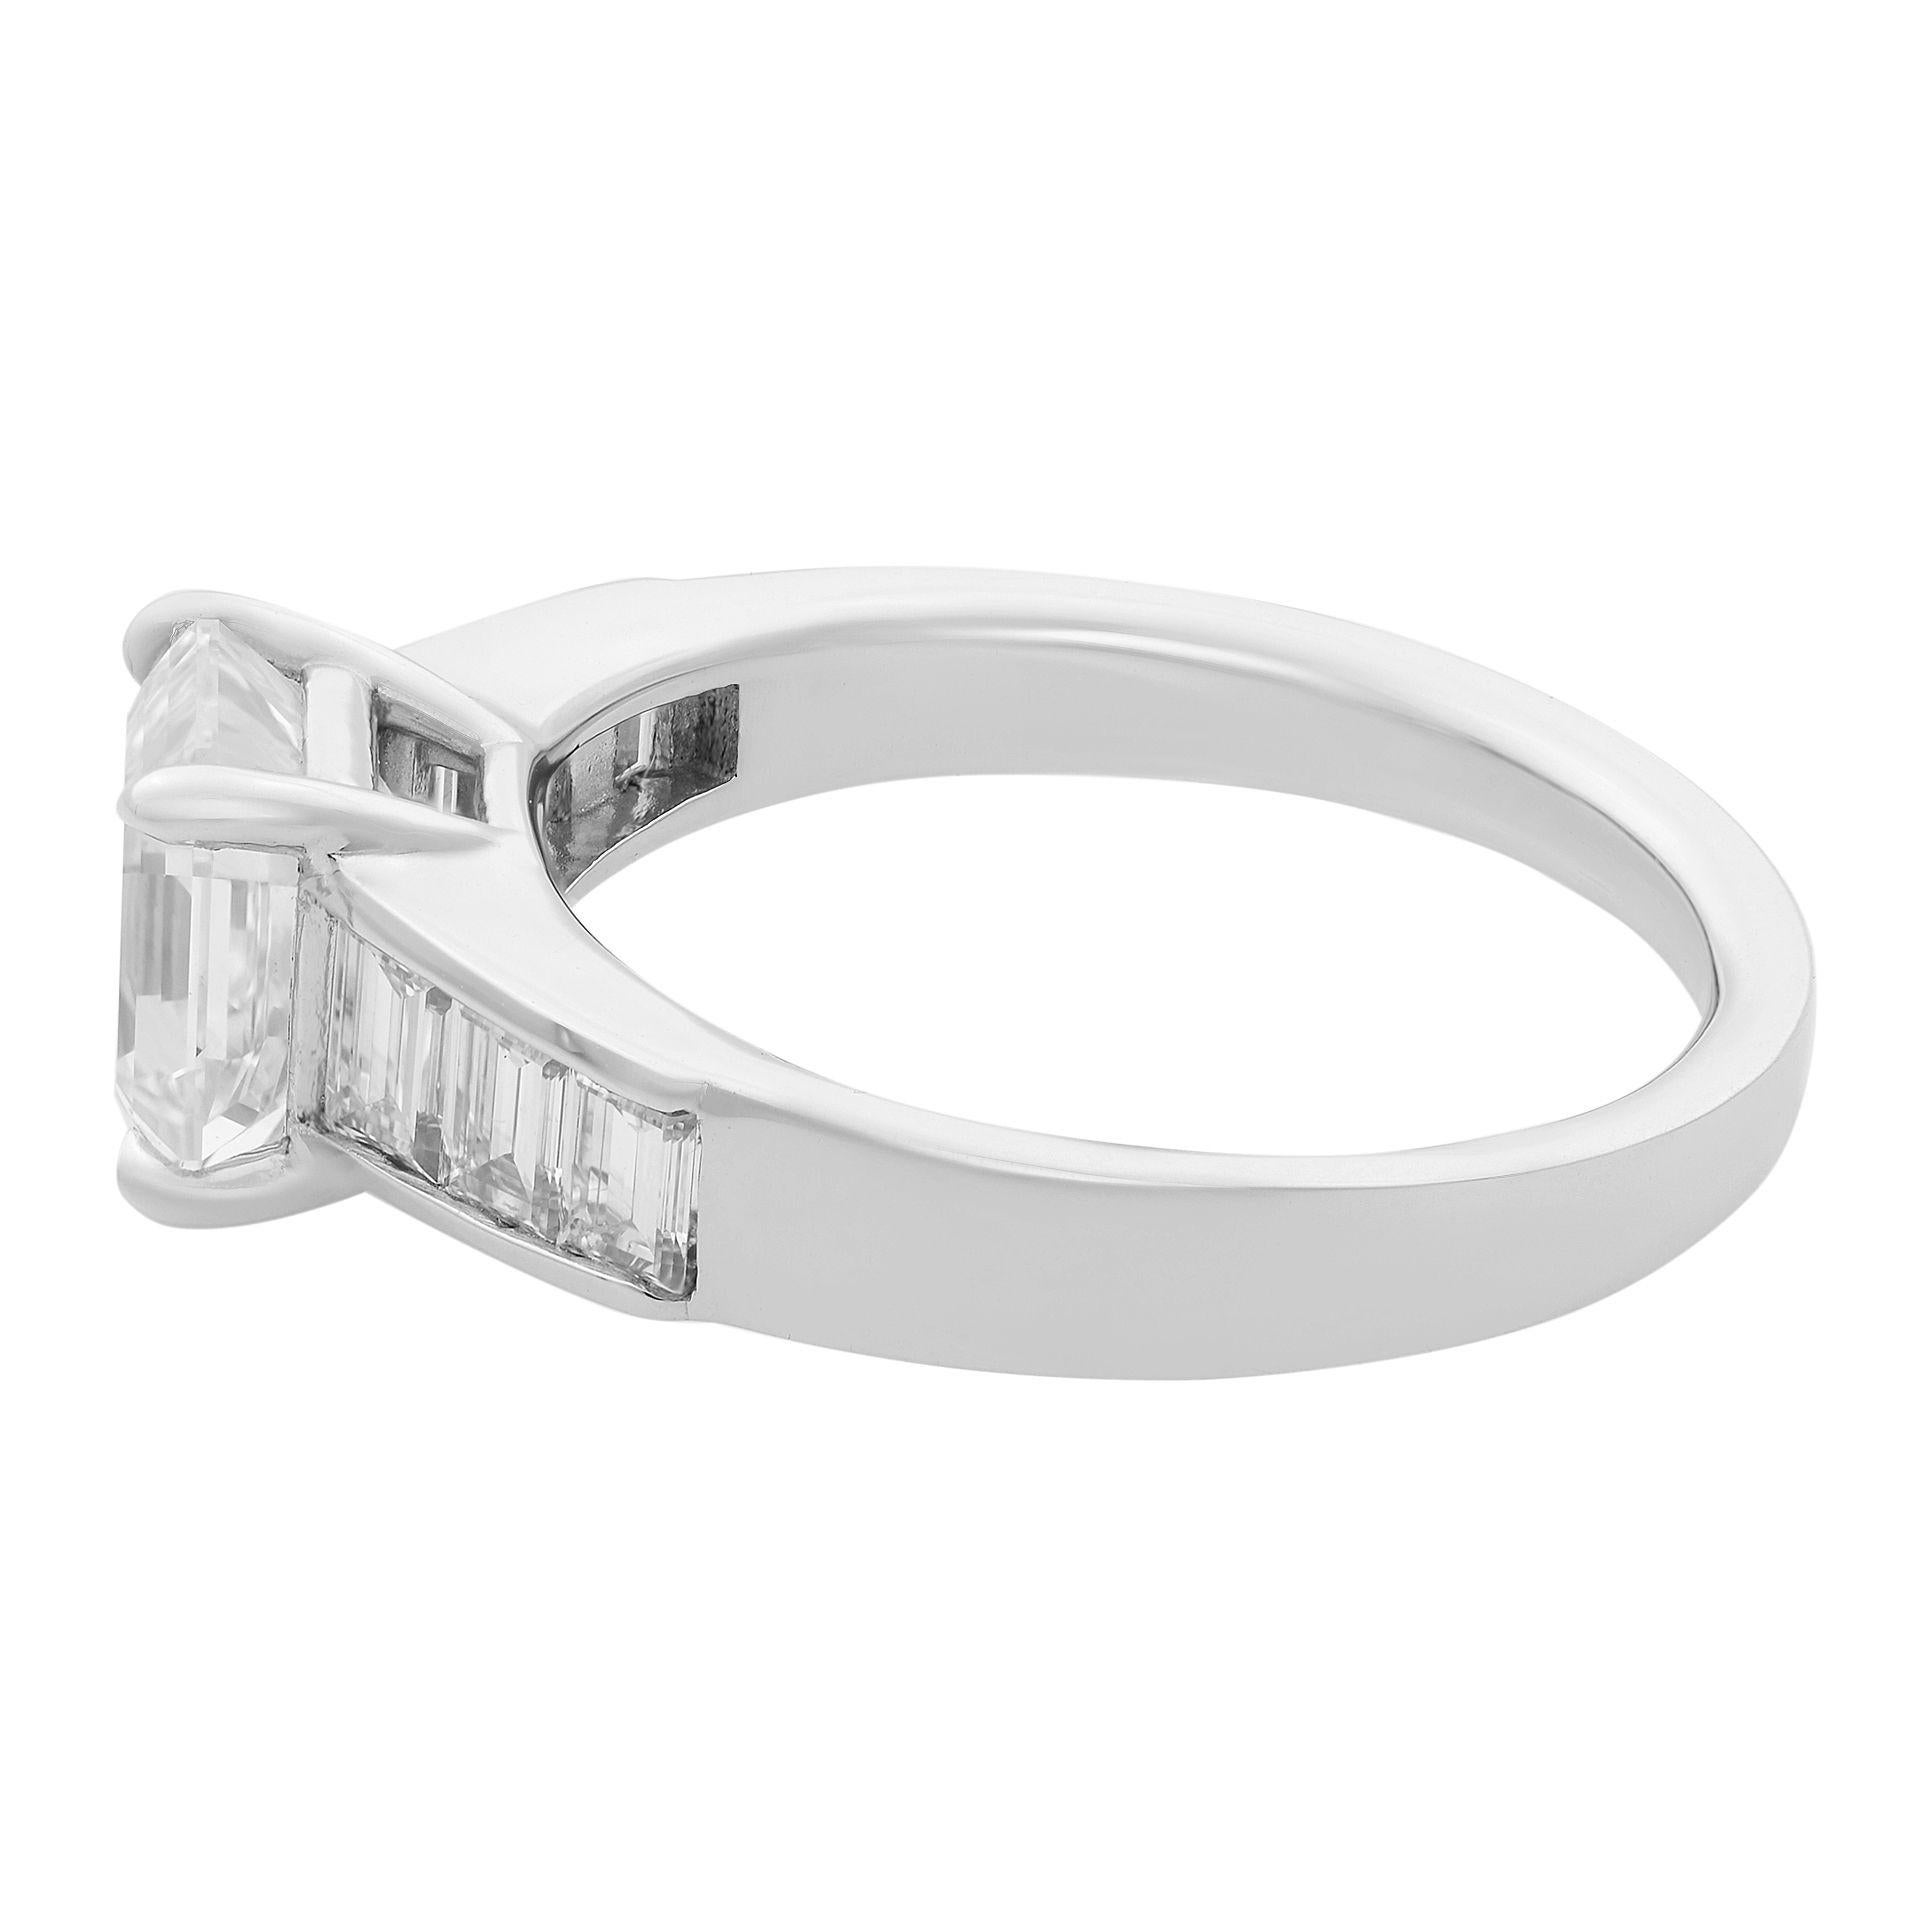 This modern and stylish engagement ring features square emerald cut center stone tapered emerald and baguettes channel set shank. Center stone weights 2.21 carat. Total carat weight 2.86. GIA certified. Diamond color grade J and VVS2 clarity grade.